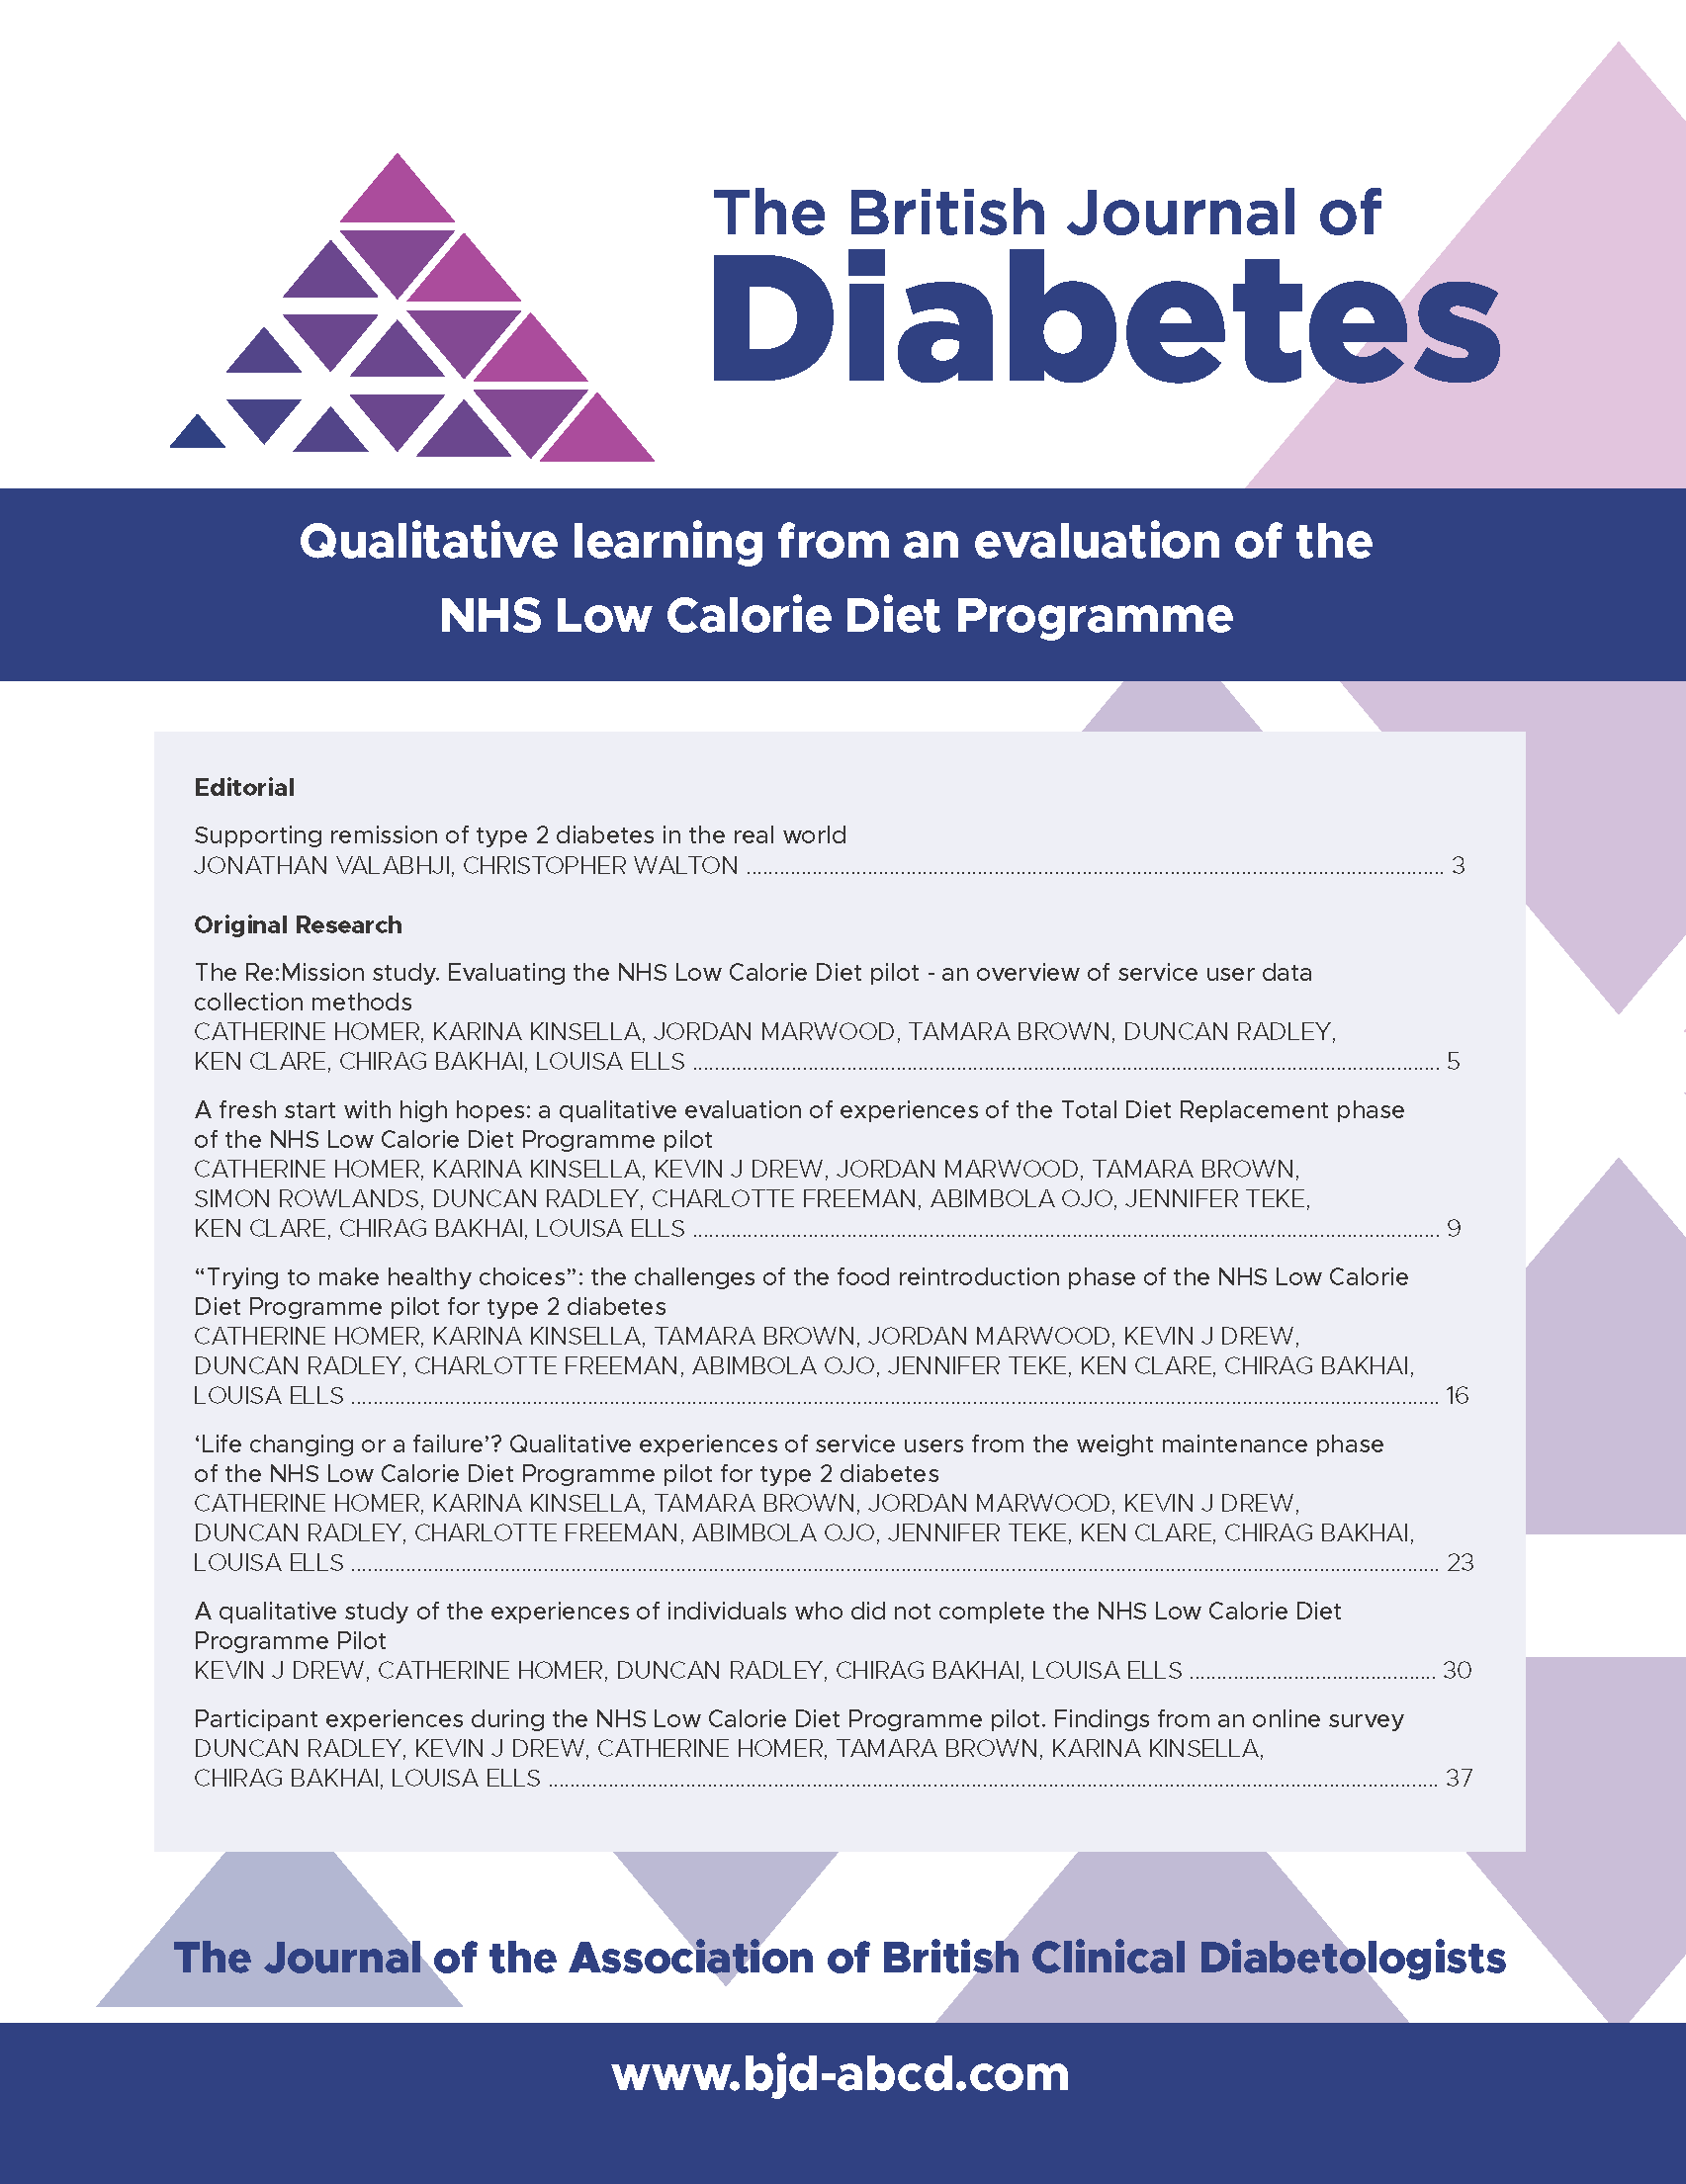 					View Online First: Qualitative learning from an evaluation of the NHS Low Calorie Diet Programme
				